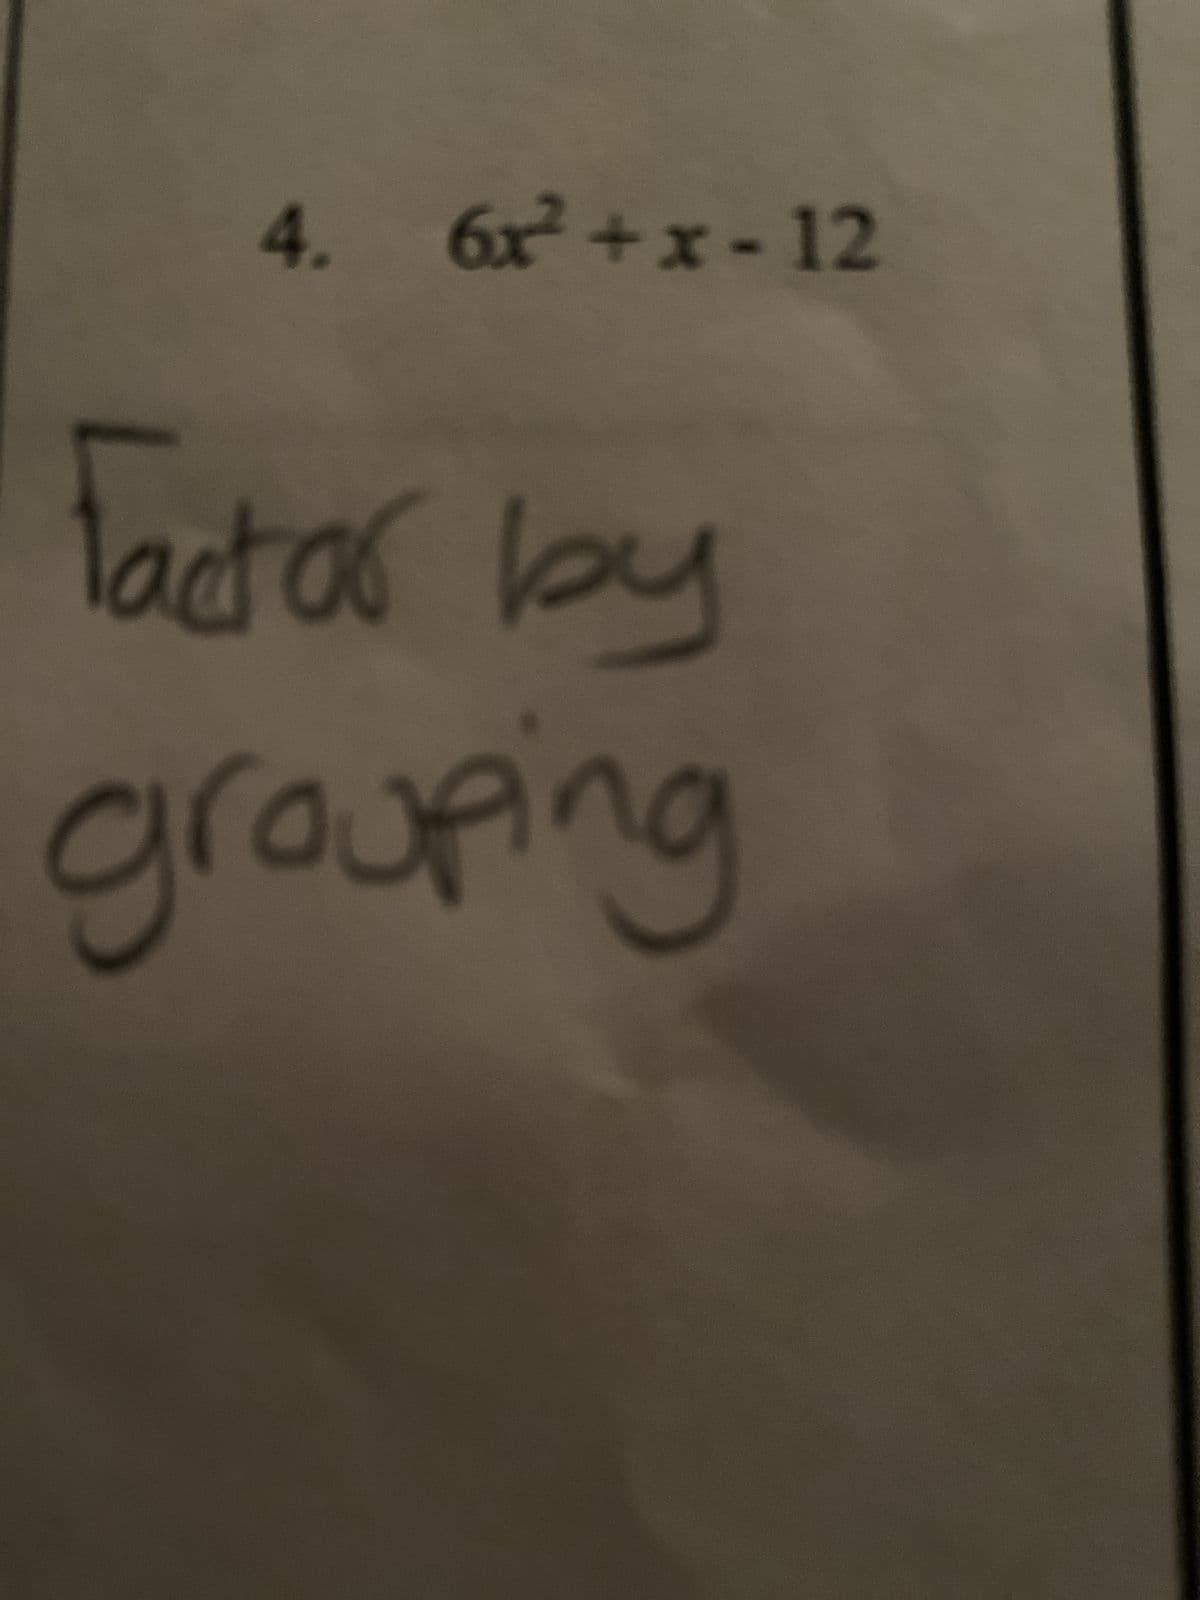 4. 6x²+x-12
Factor by
grouping